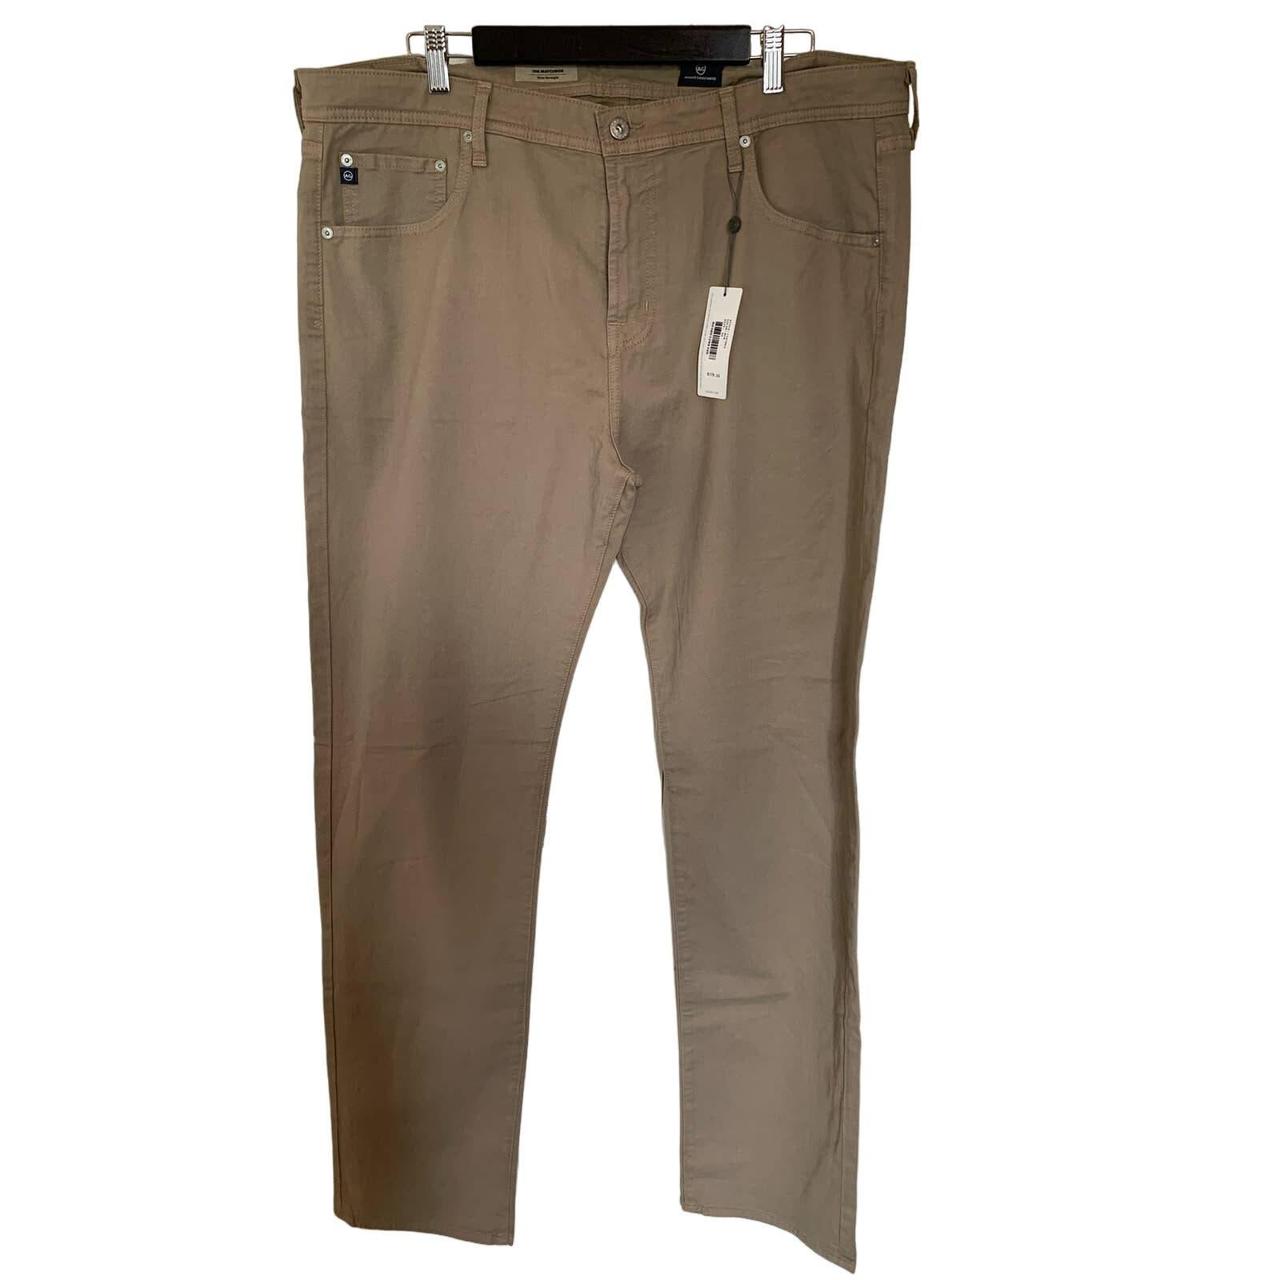 Classic Polo Mens 100% Cotton Solid Slim Fit Khaki Color Trousers - TN1-17  D-RST - Classic Polo